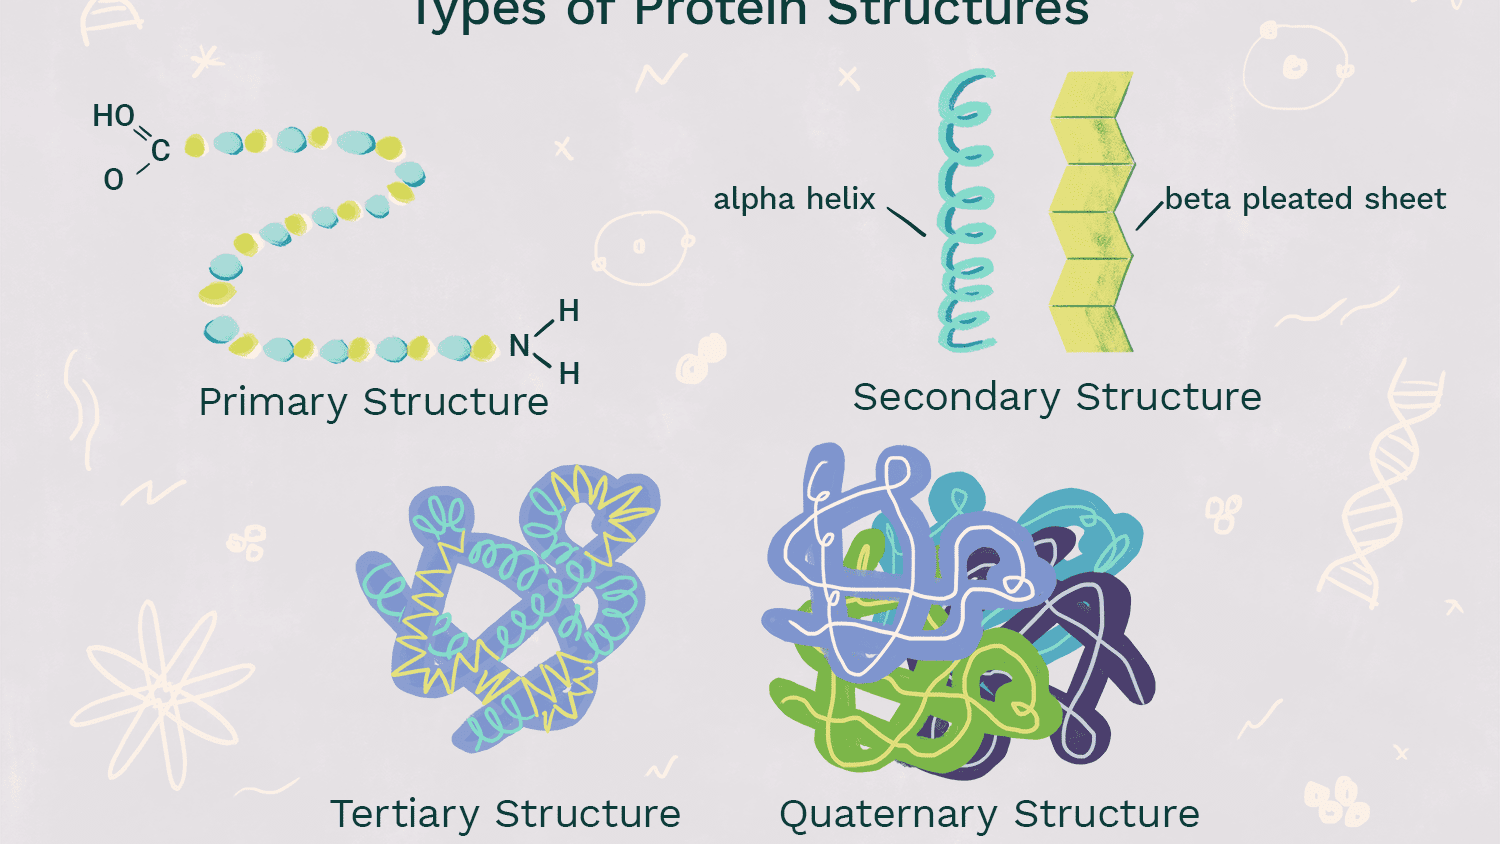 <p>-coils and folds that are patterned in protein -result from Hydrogen bonding of the peptide backbone causing the amino acids to bend into repeating patterns (oxygen has partial negative, and hydrogen attached to nitrogen have a partial positive, so weak hydrogen bonds from that strengthen and shape protein) -Alpha Helix: Polypeptide coils into a helix shape because of hydrogen bonding between every 4th amino acid -Beta Pleated Sheet: 2 or more segments of the polypeptide bend sharply and lie parallel to each other, hydrogen bonds form between parts of these segments</p>